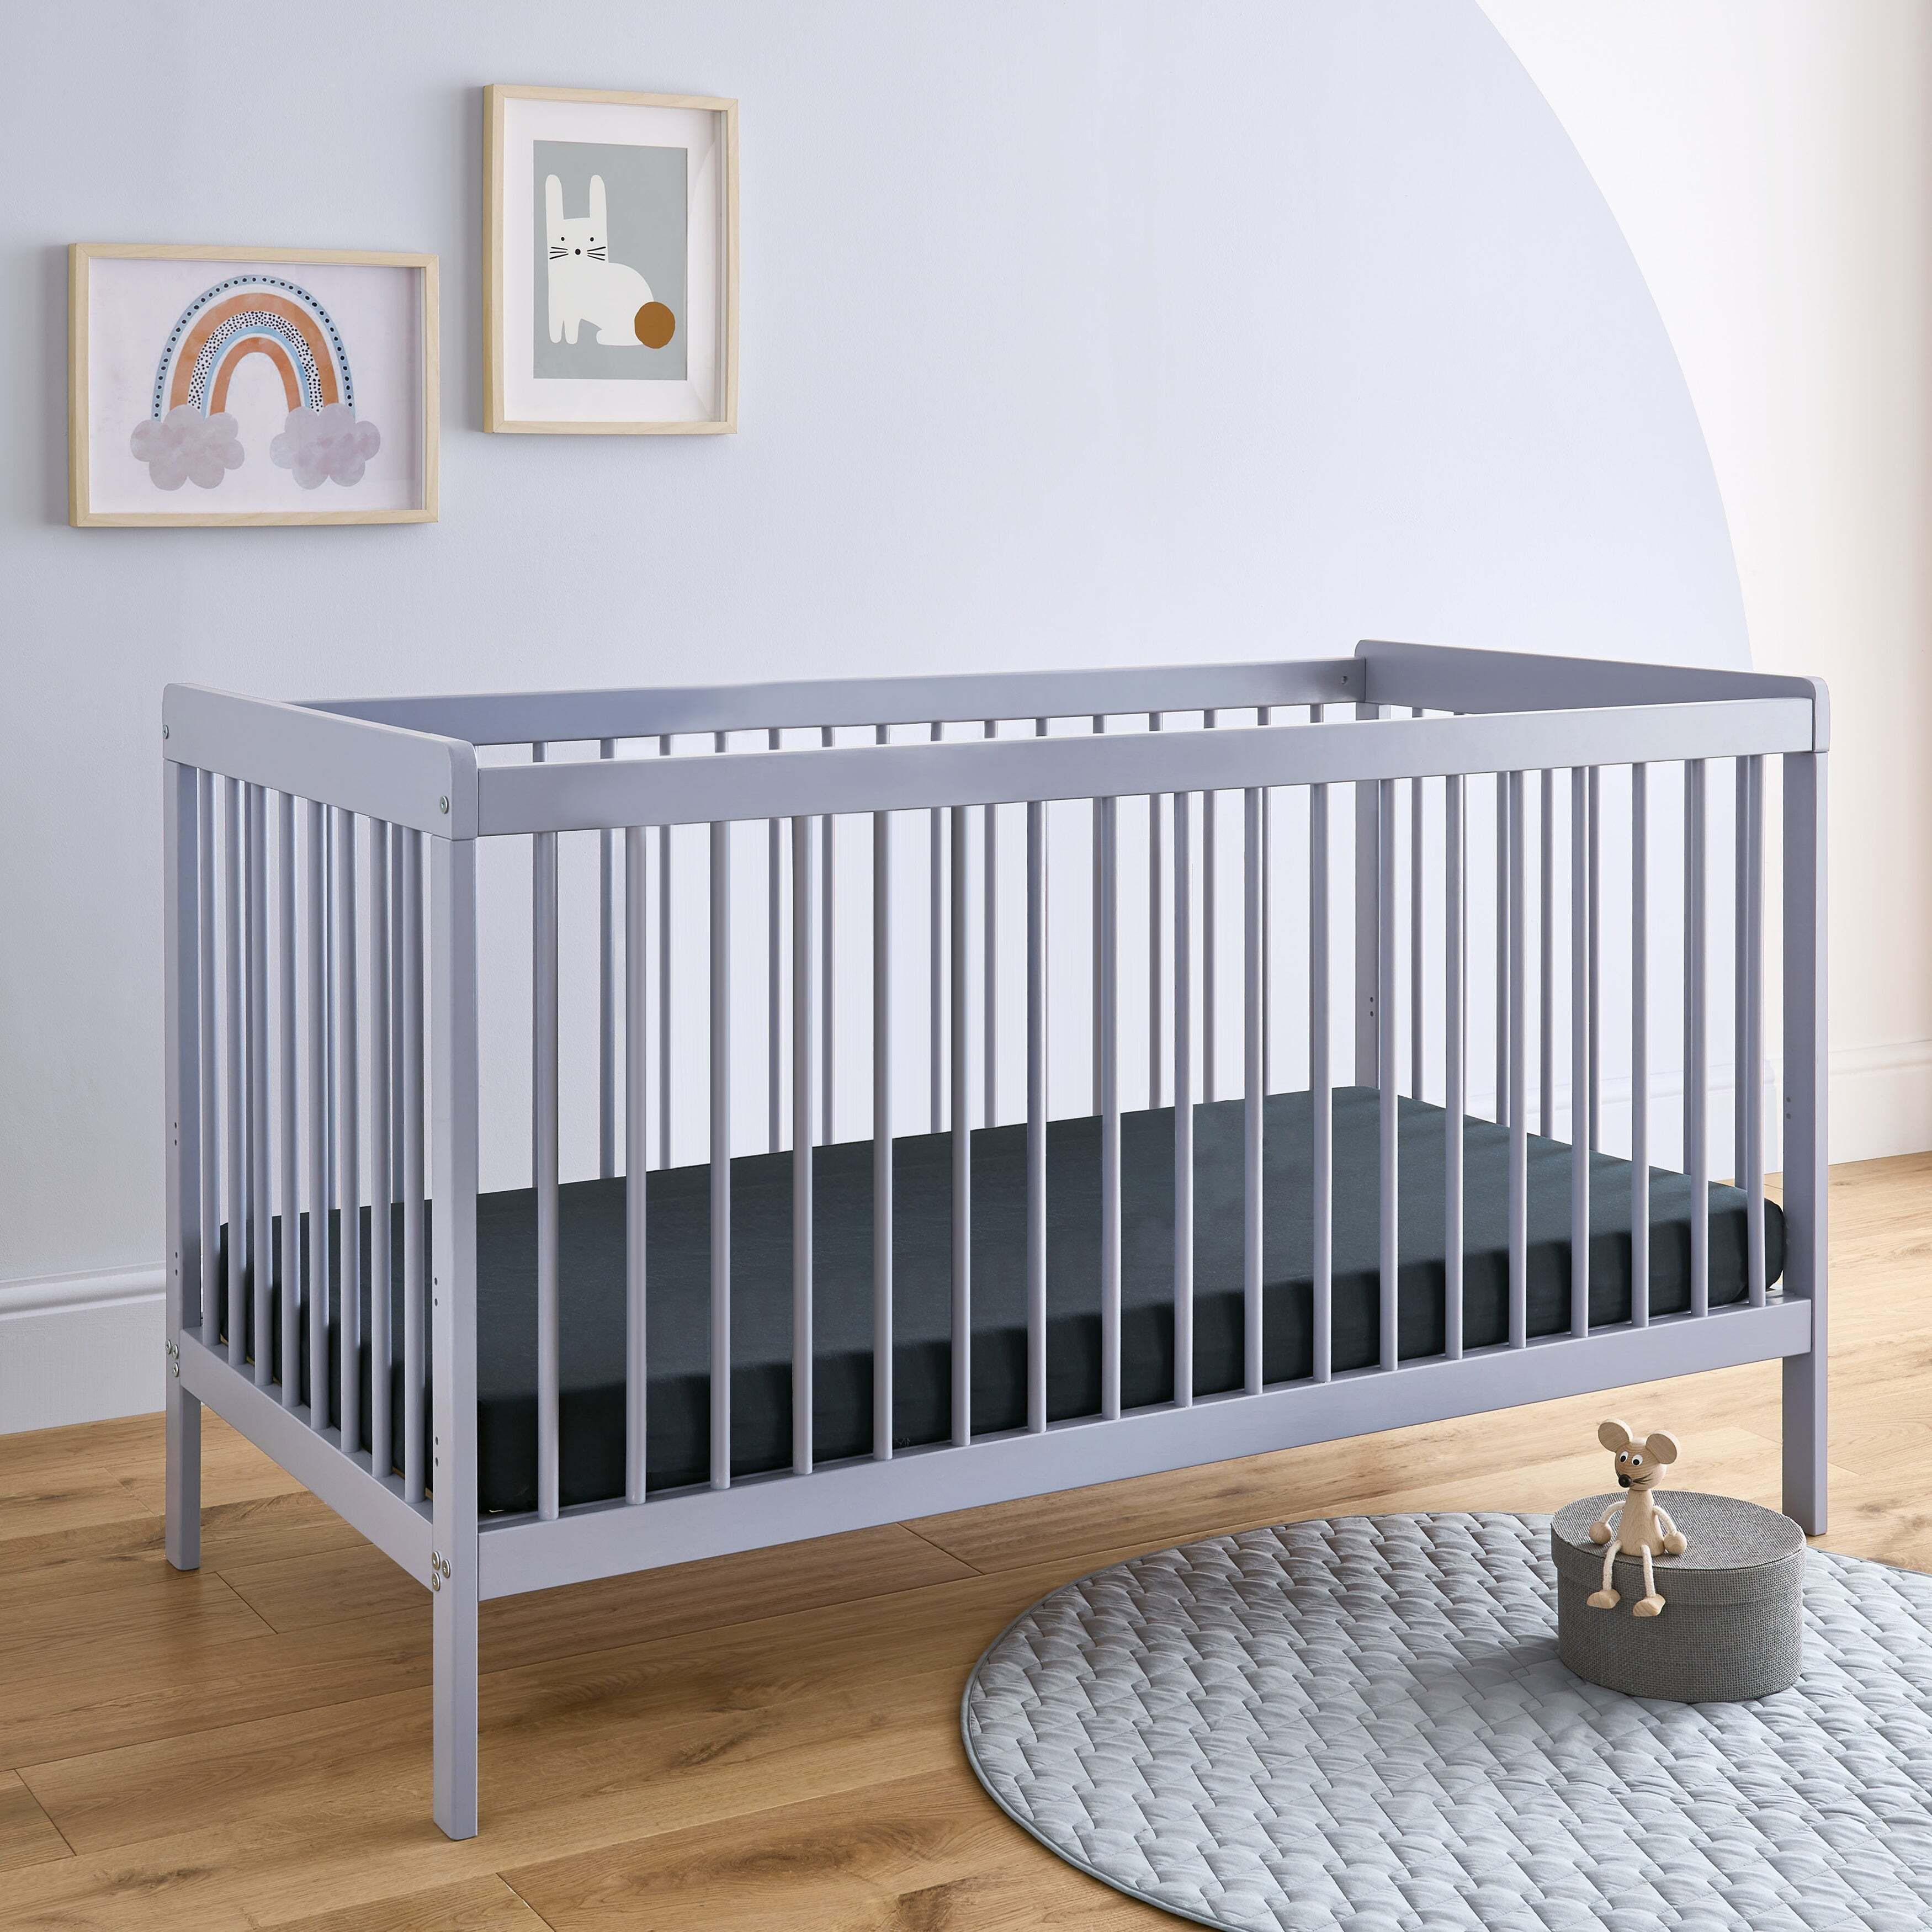 CuddleCo Nola Cot Bed, Painted Pine Light Blue